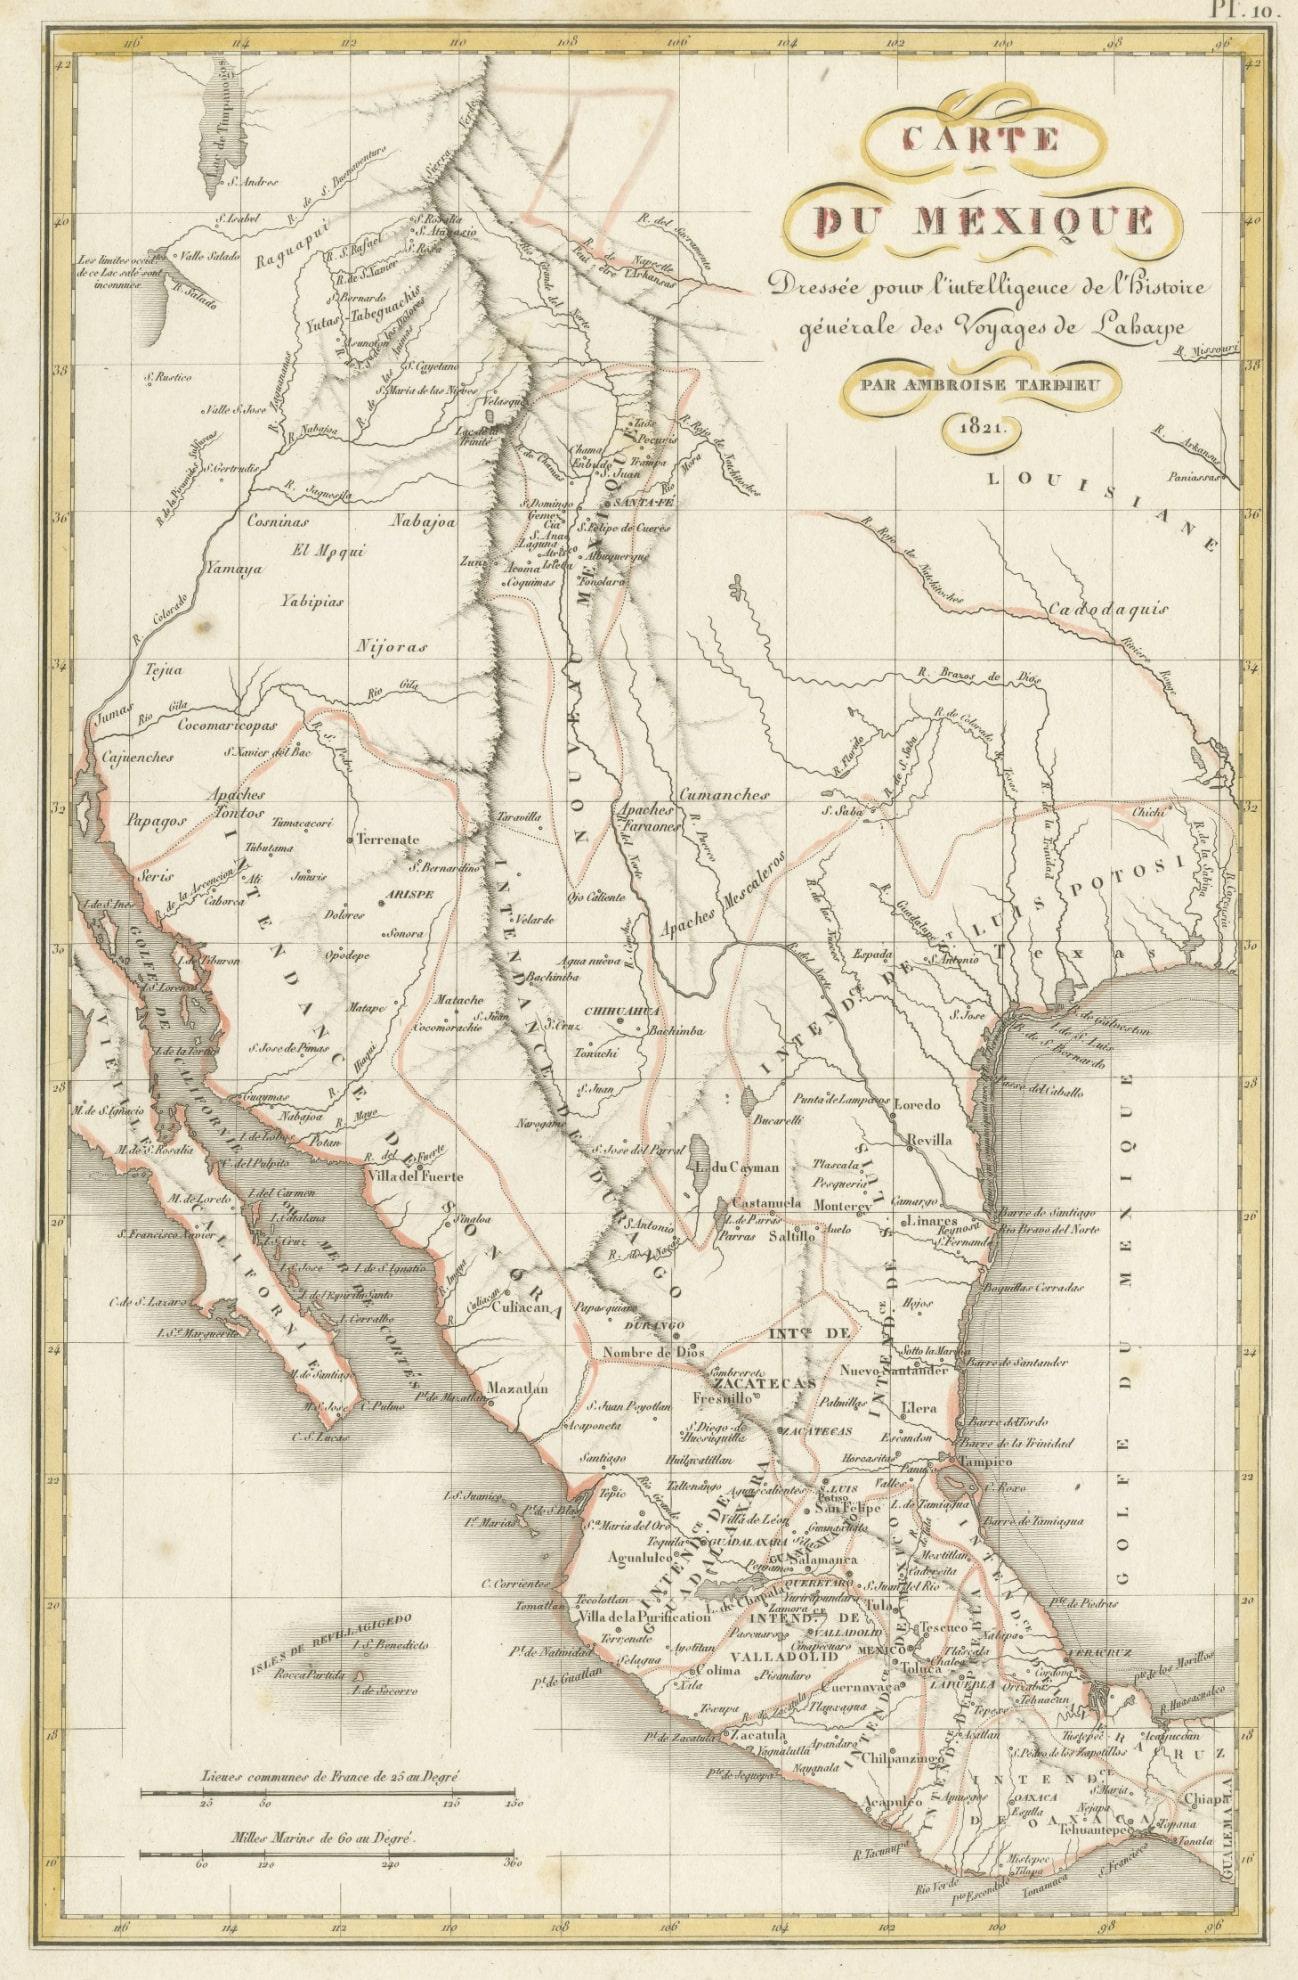 Antique map titled 'Carte du Mexique'. Fine Humboldt inspired map of Mexico, in the midst of its struggle for Independence from Spain, published the same year as Moses Austin obtained his first grant from the Spanish authorities to settle 300